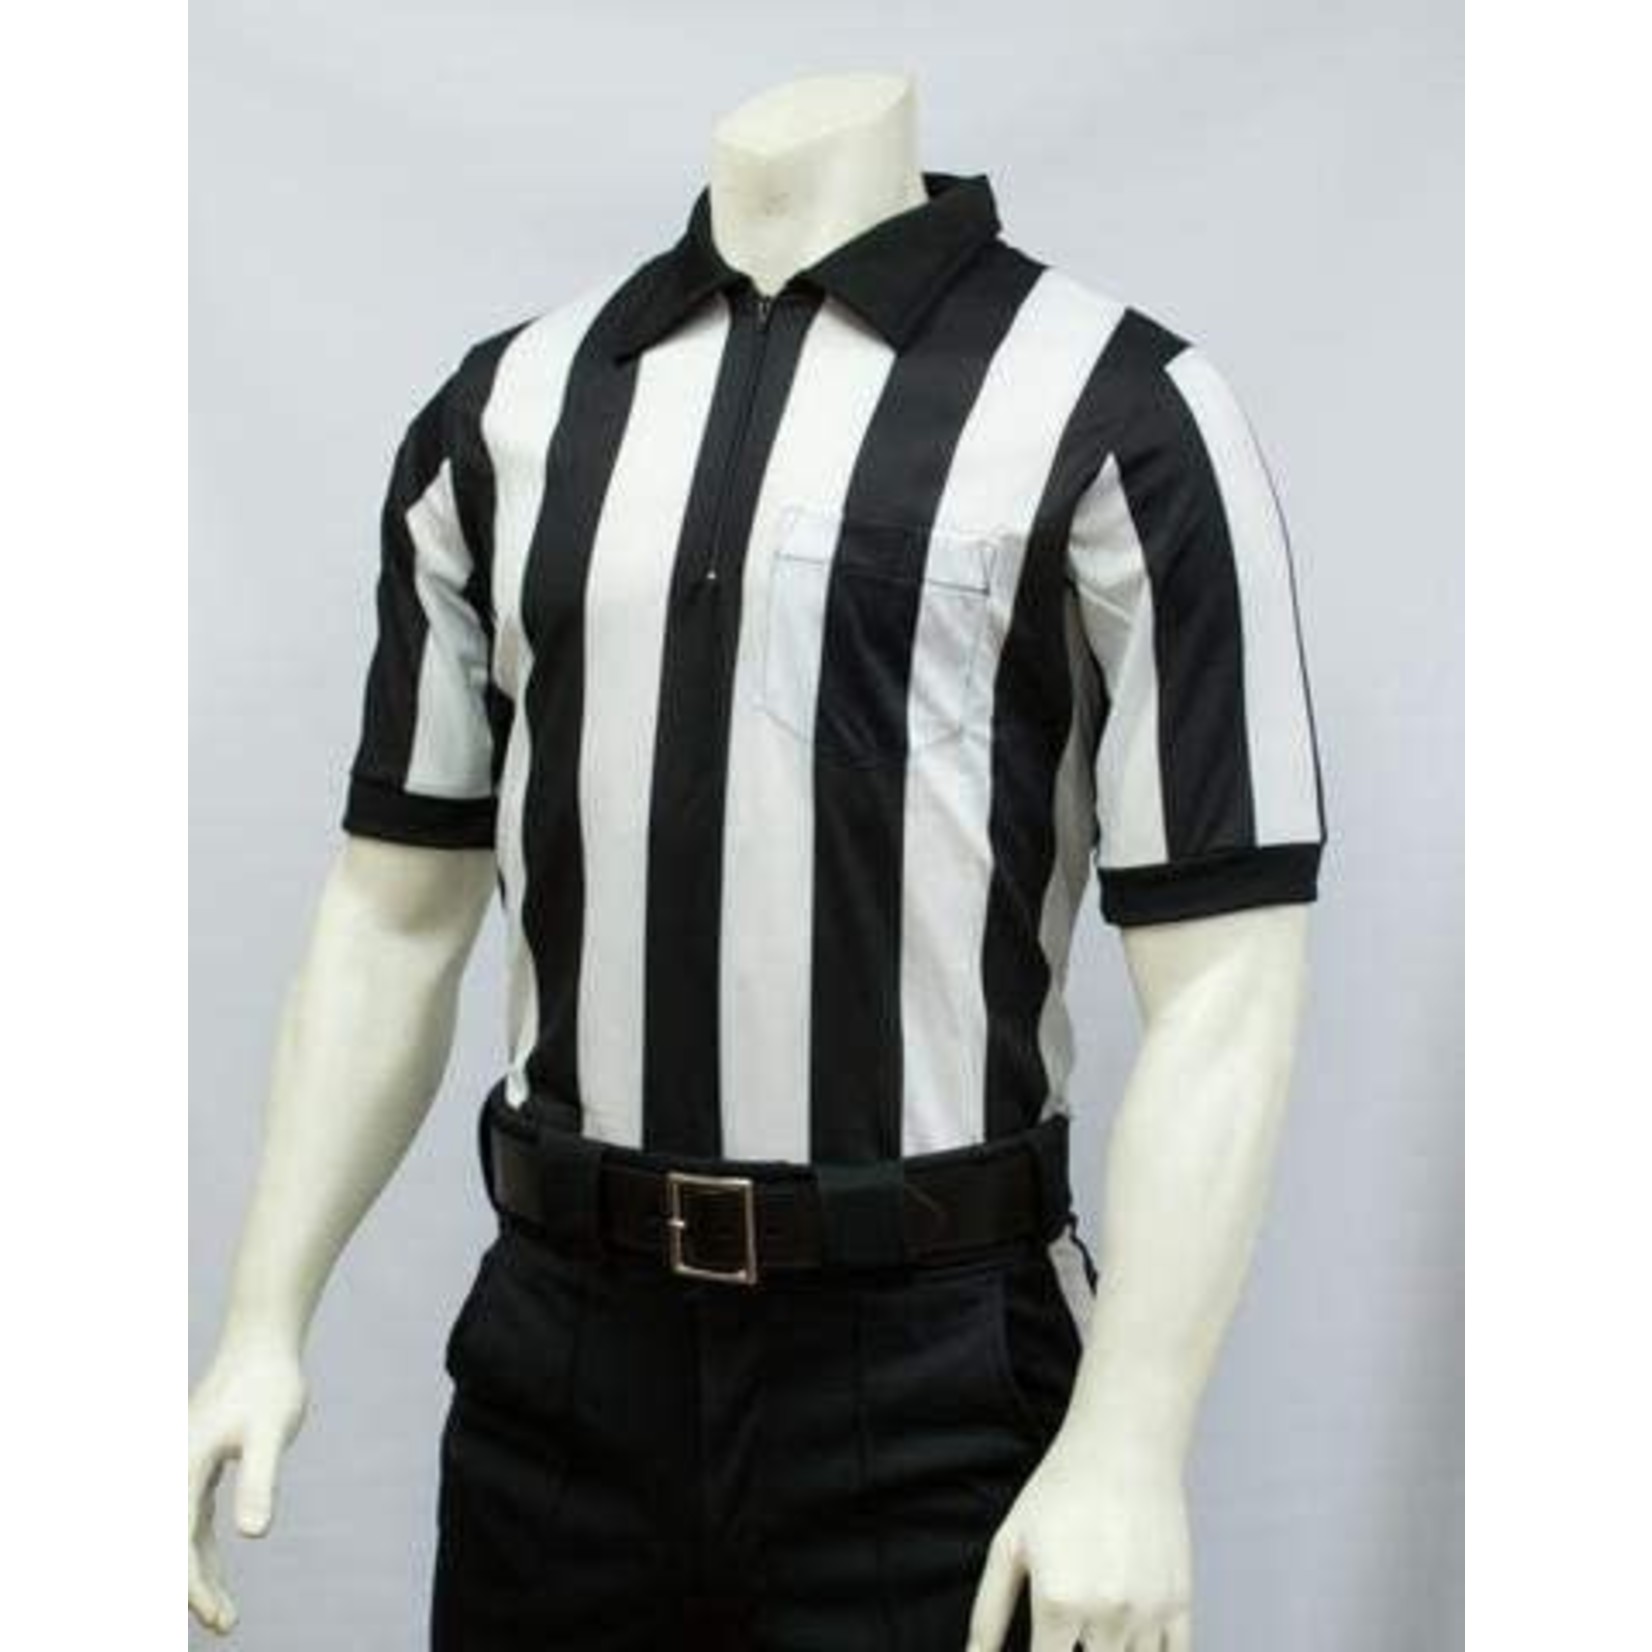 Smitty Smitty 2 Inch Stripe Mesh S/S Officials Shirt